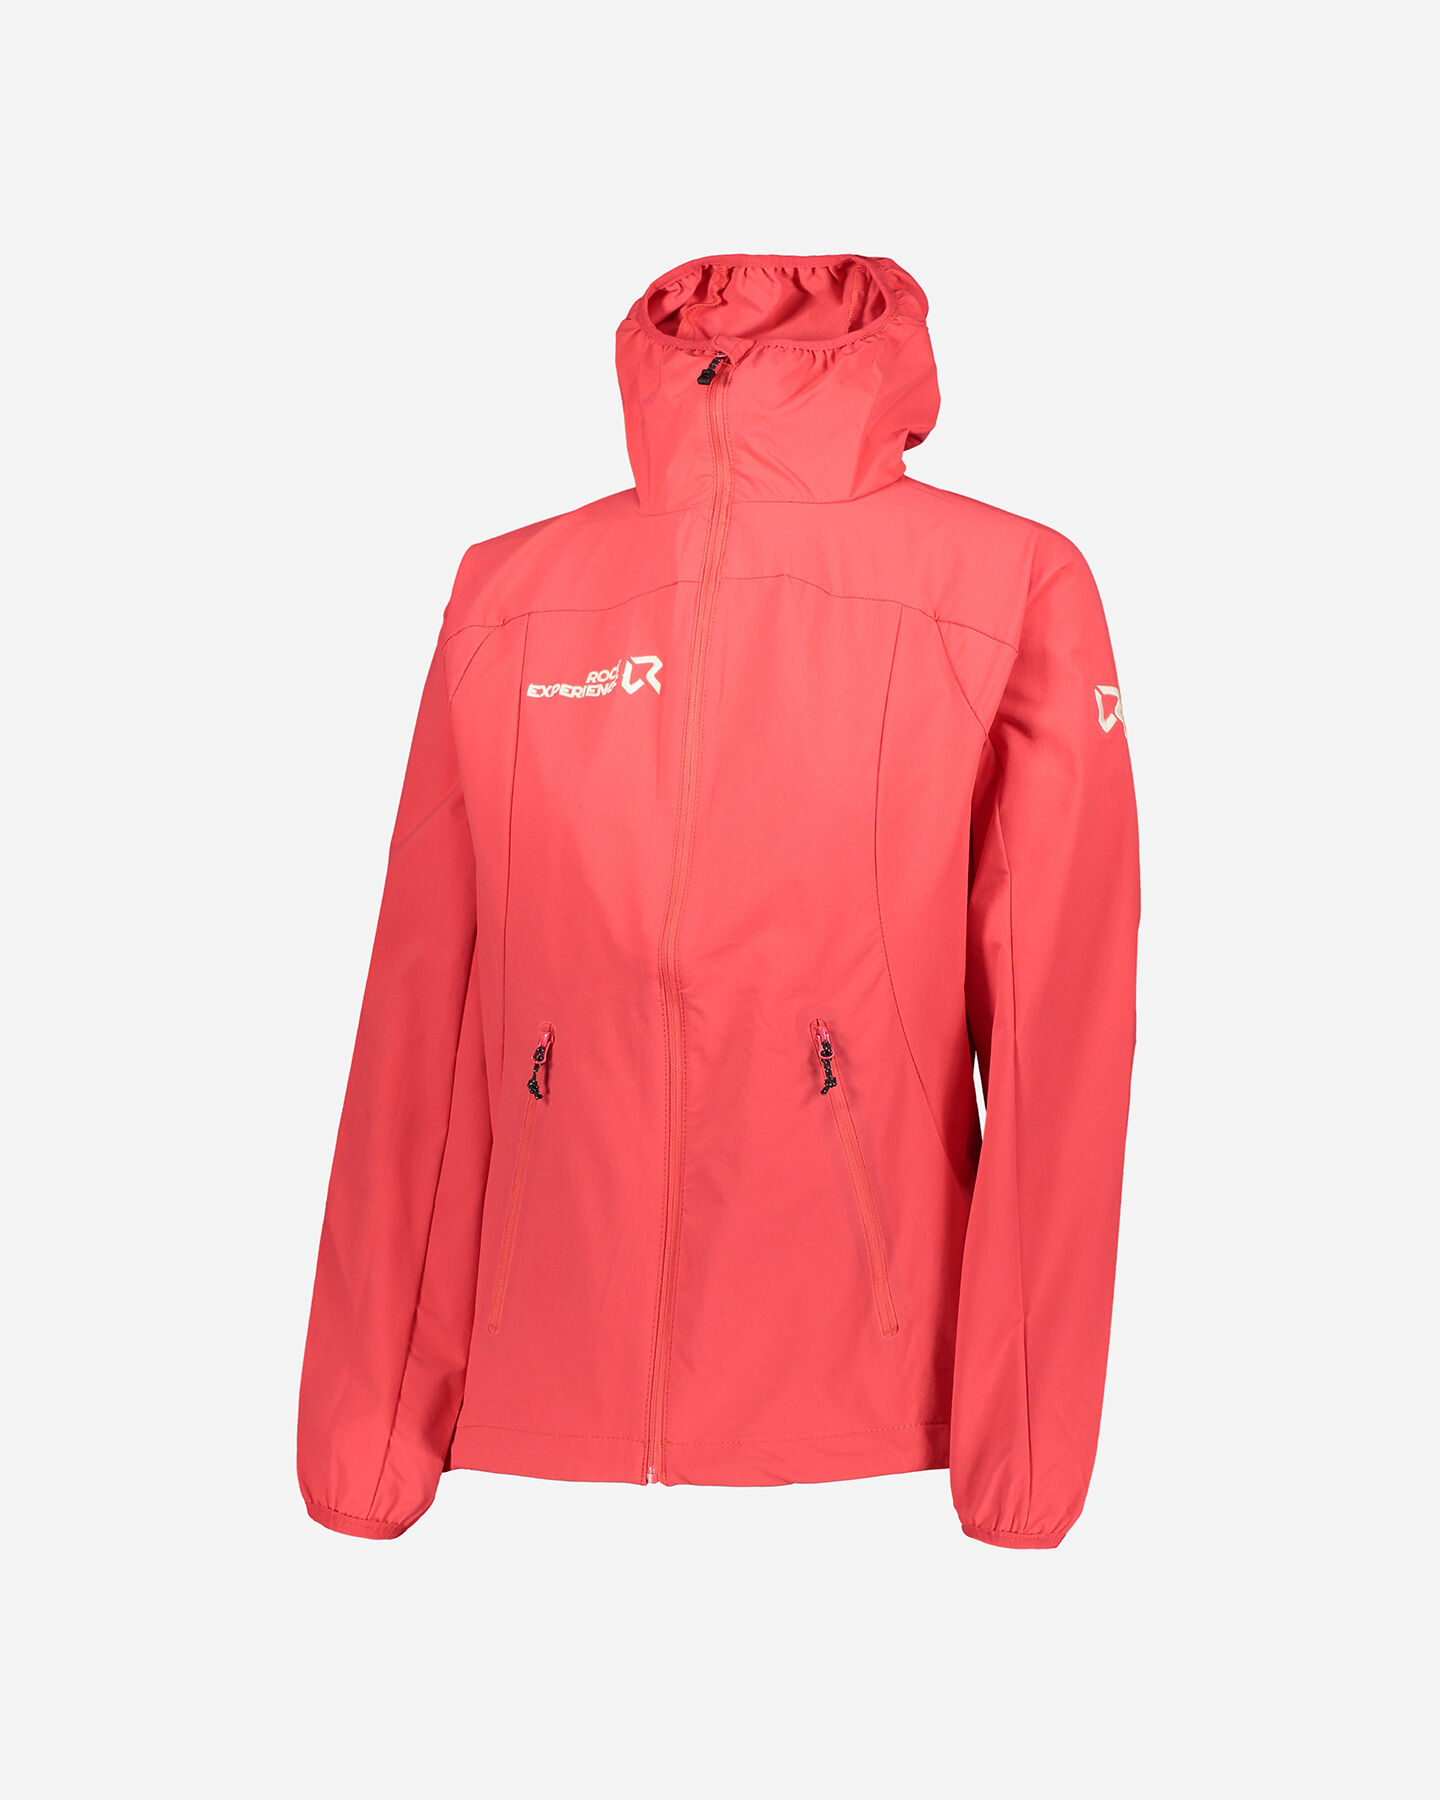  Pile ROCK EXPERIENCE SOLSTICE HOODIE W S4090033|1|XS scatto 0